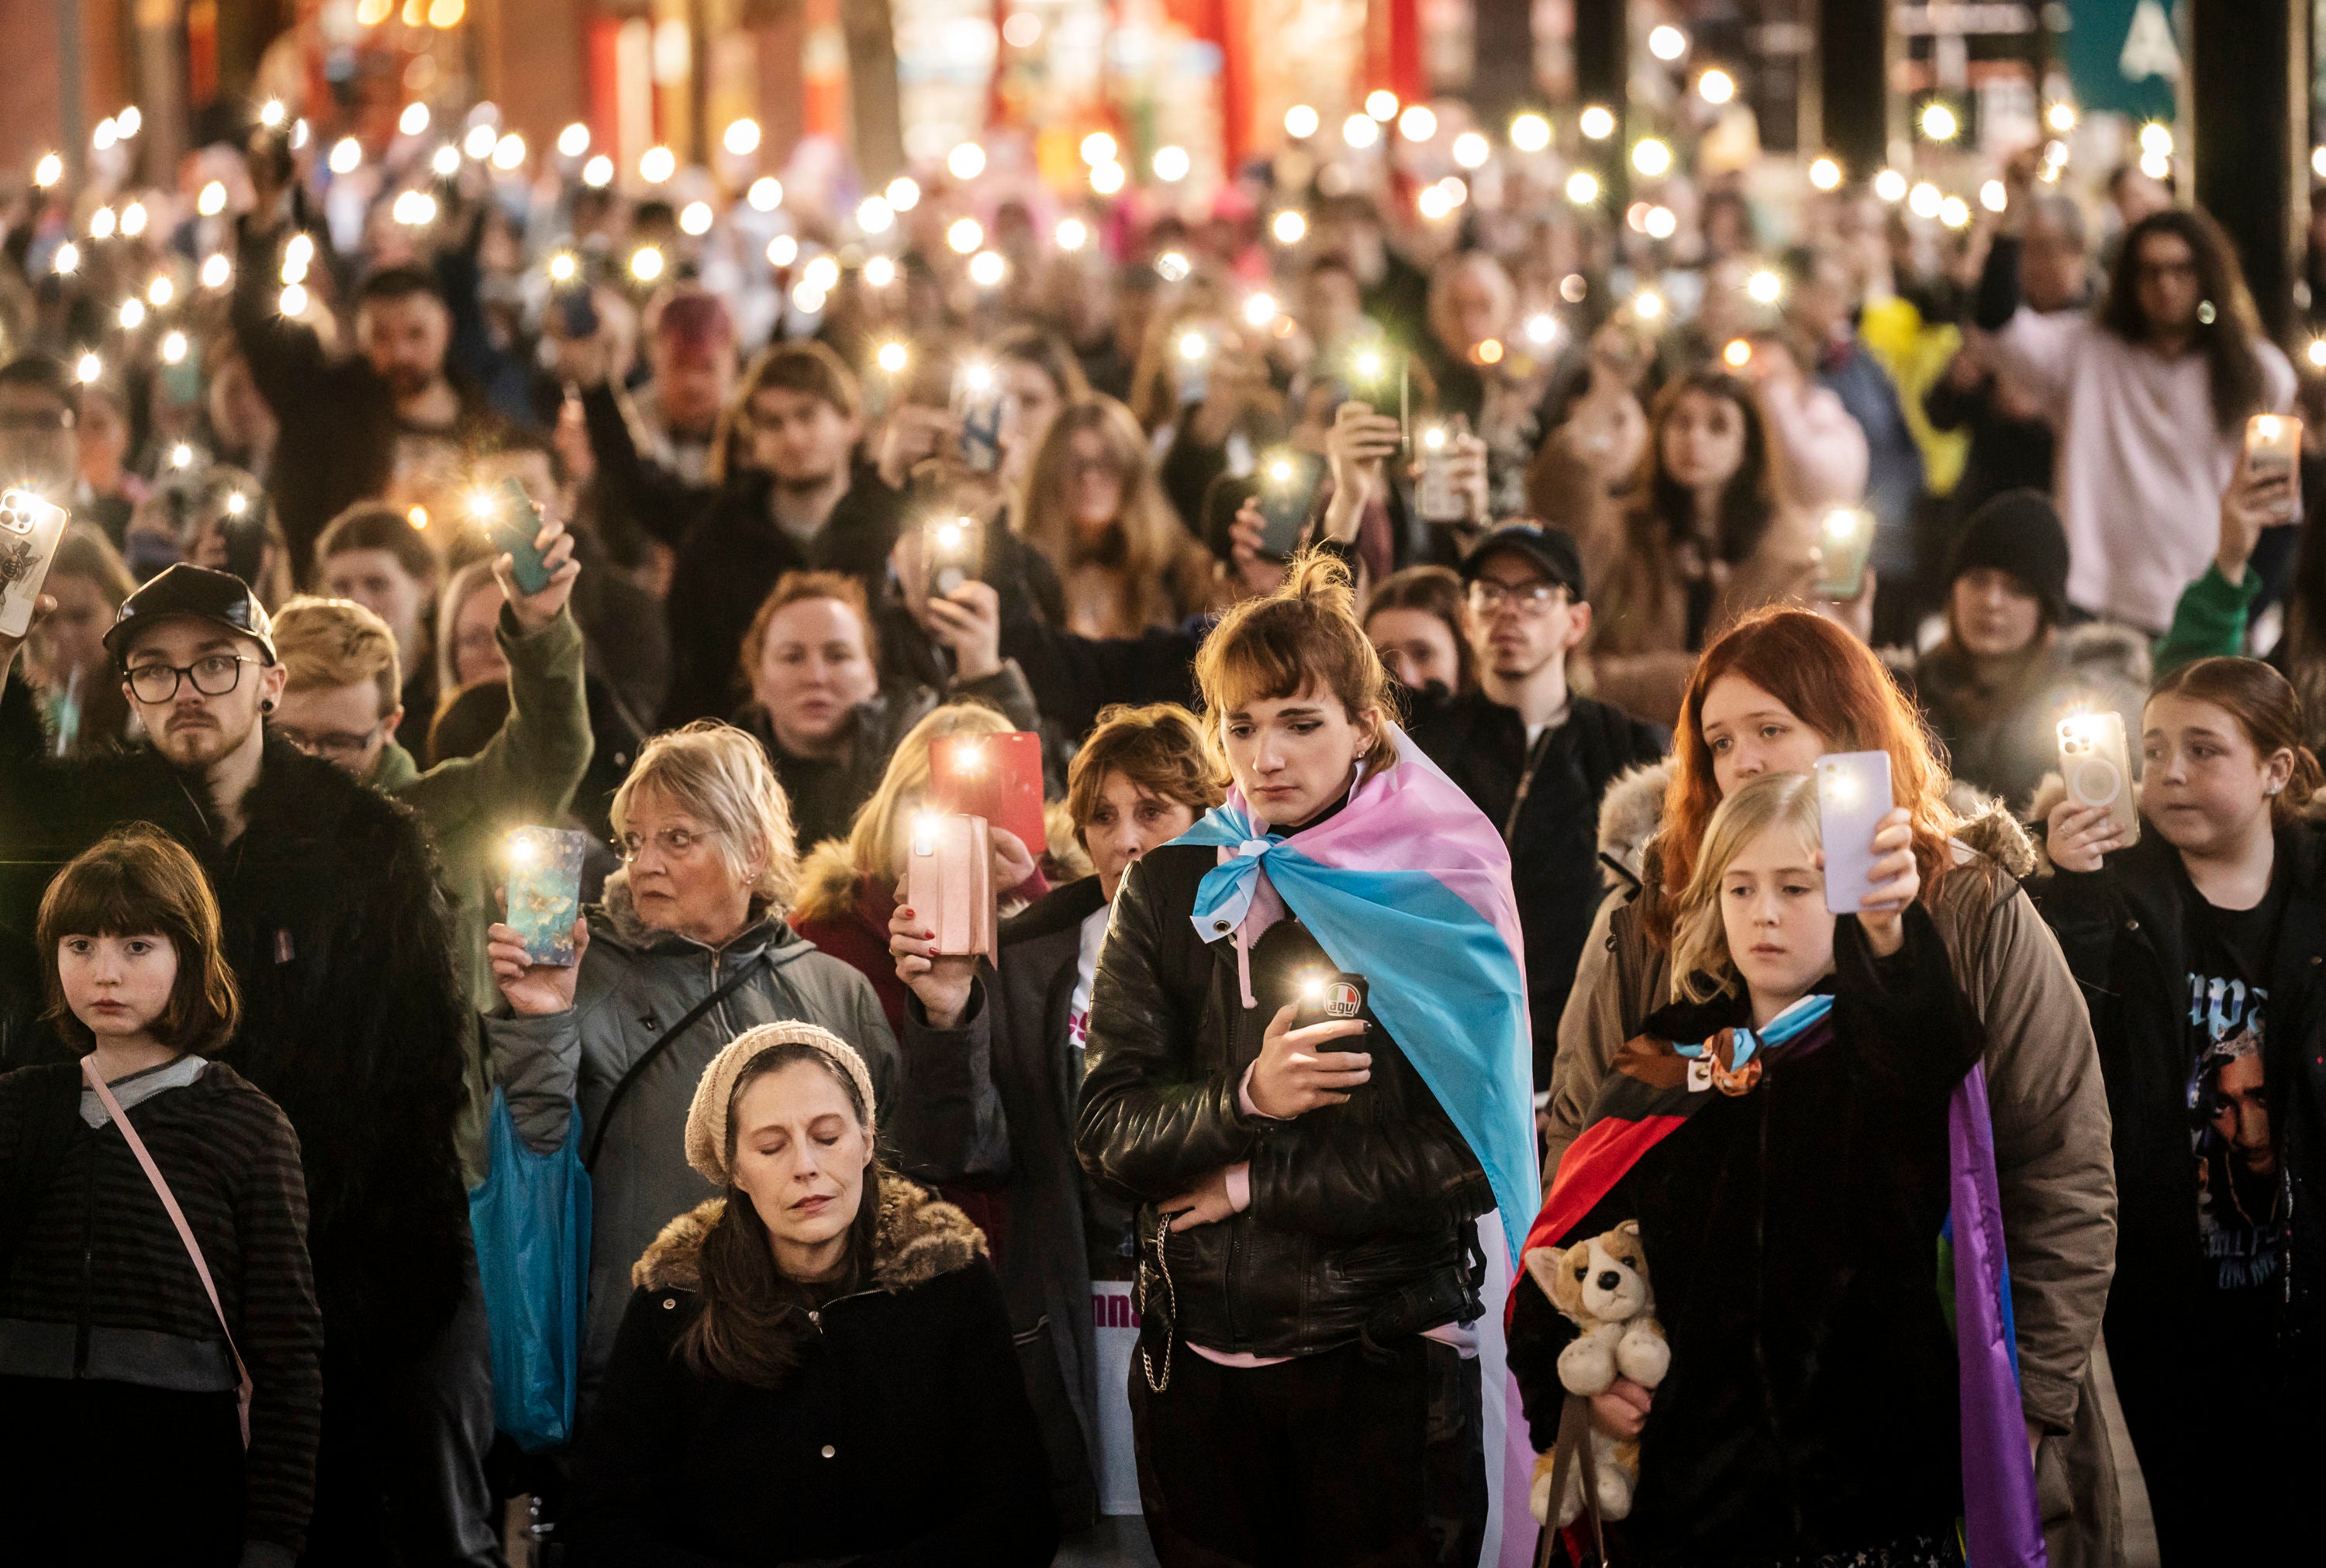 Members of the public hold their phones with the torch function set during a moment of silence as they attend a candle-lit vigil at Old Market Place in Warrington in memory of transgender teenager Brianna Ghey